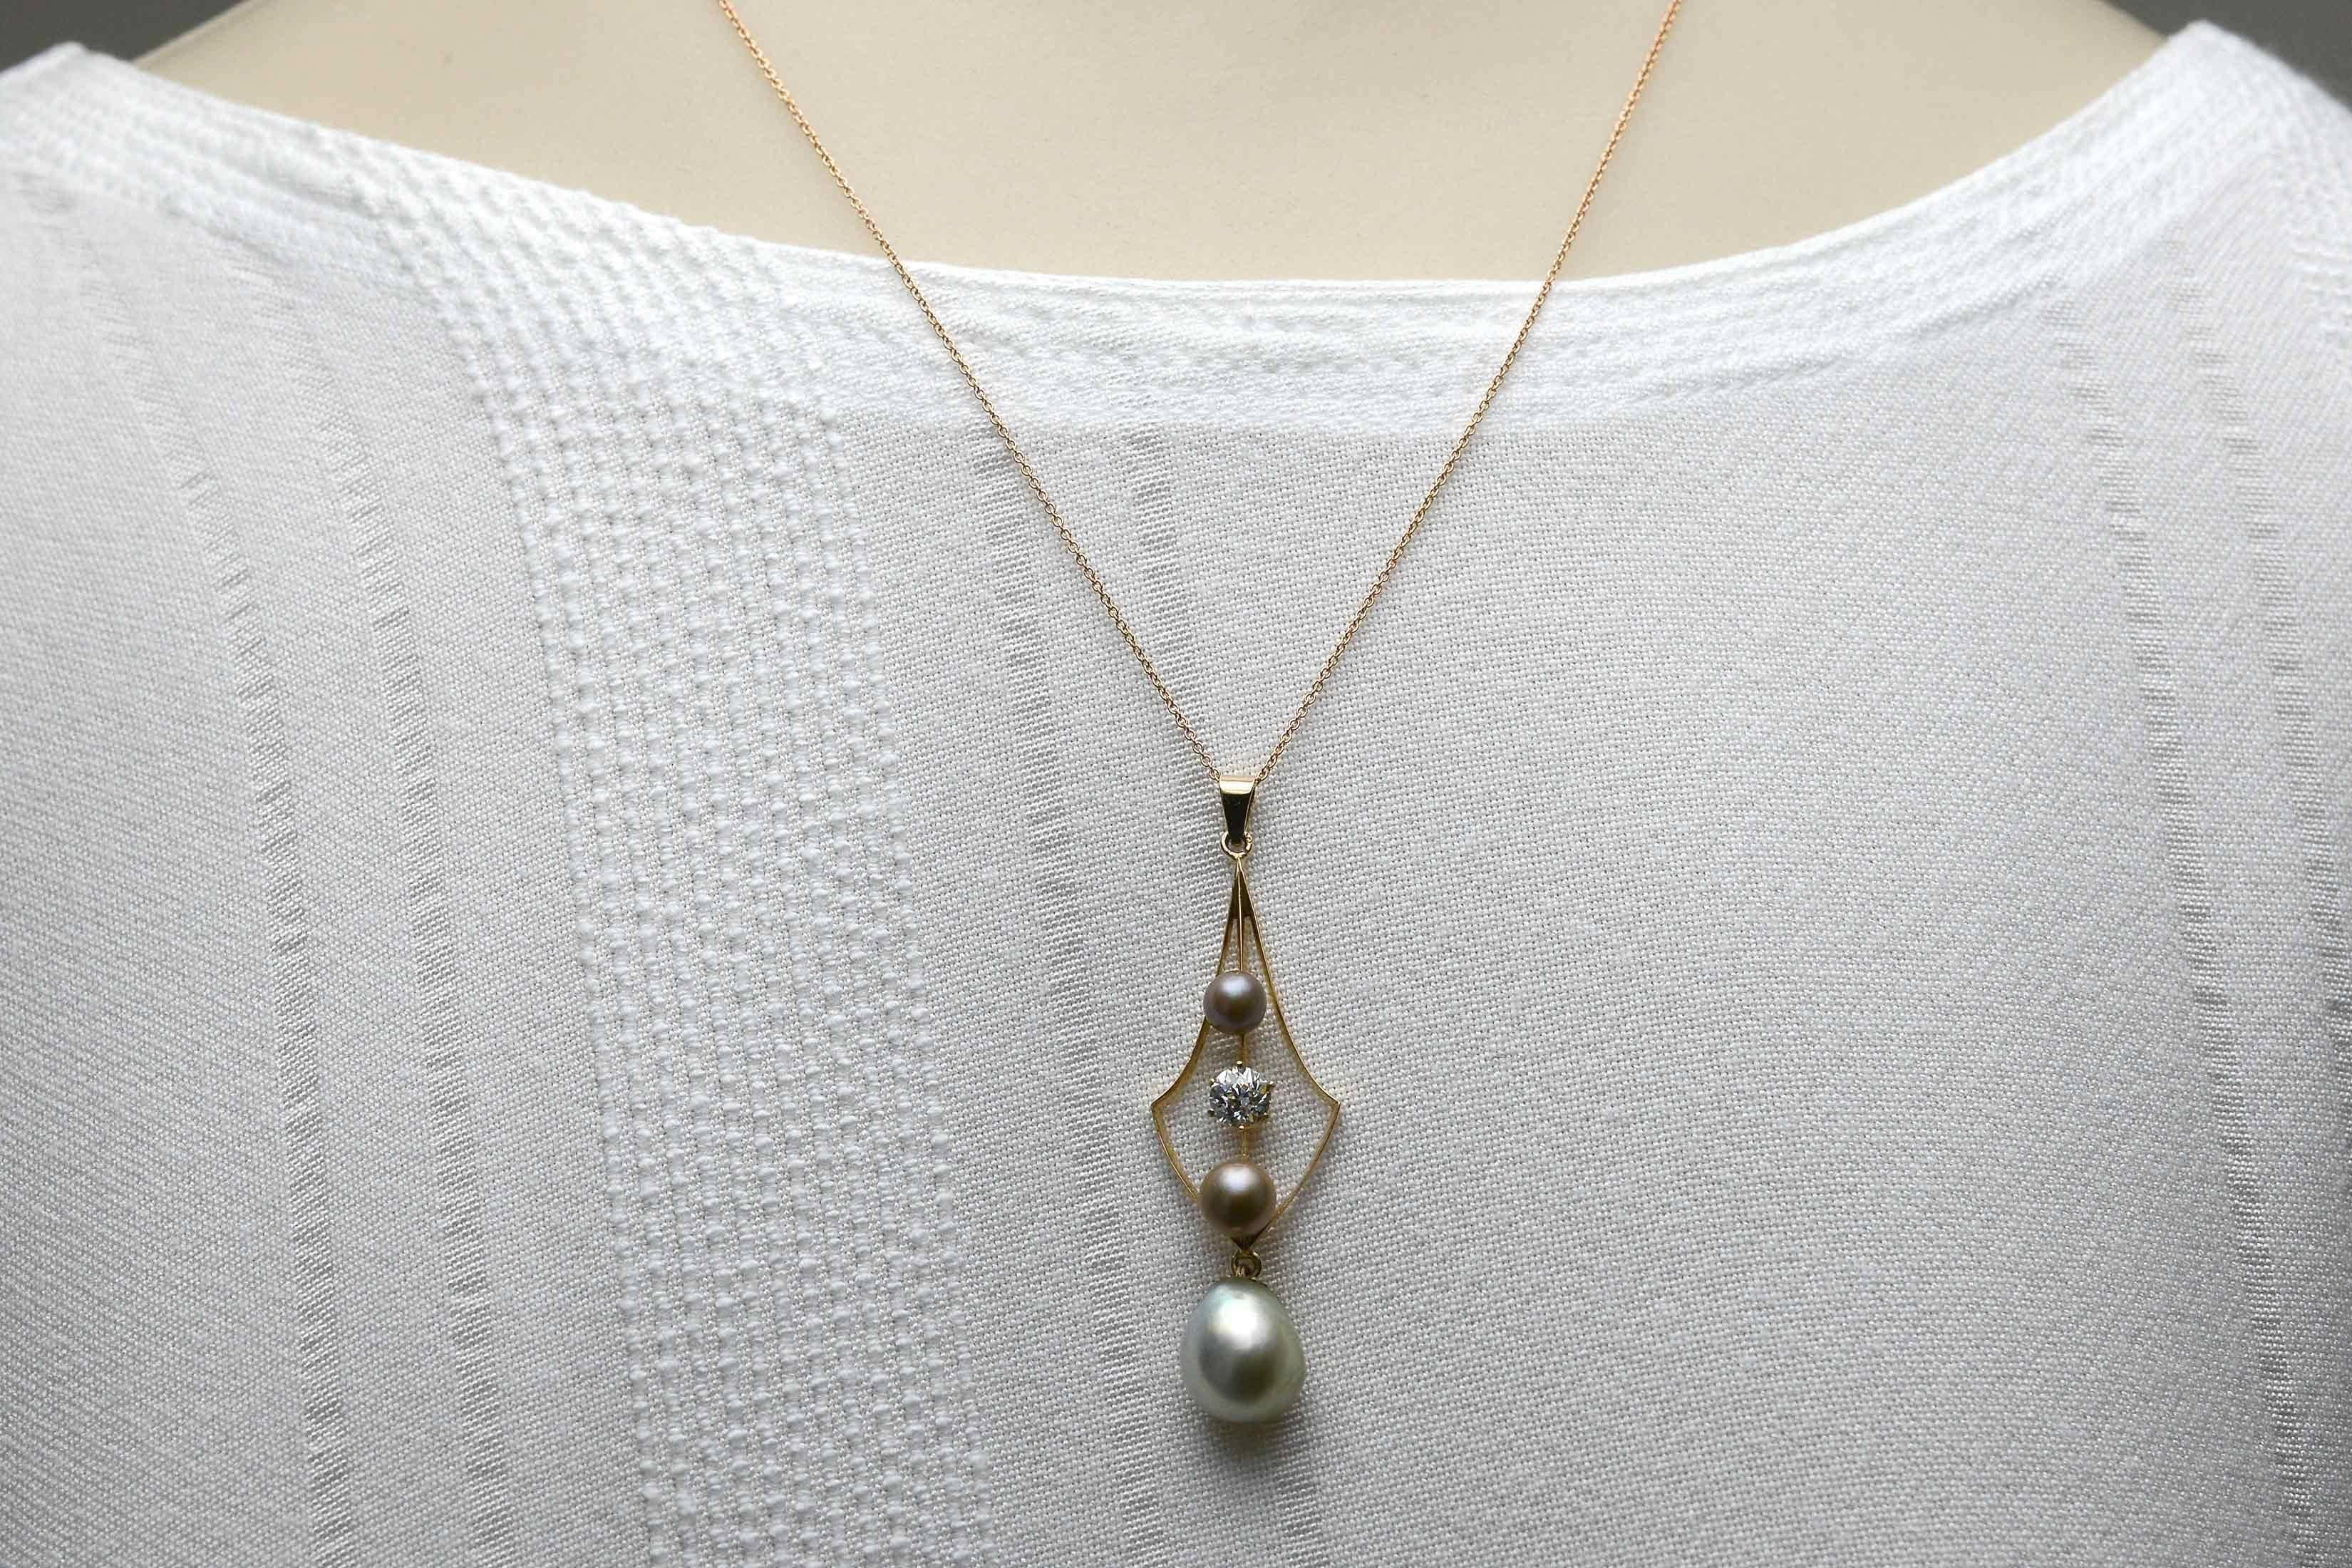 The Capitola Antique Necklace. A most curvaceous and lithe antique pendant that you love wearing everywhere. Centering on a lustrous teardrop silvery pearl, a shimmering old European cut diamond over 1/2 carat, held within a soft rose gold shield